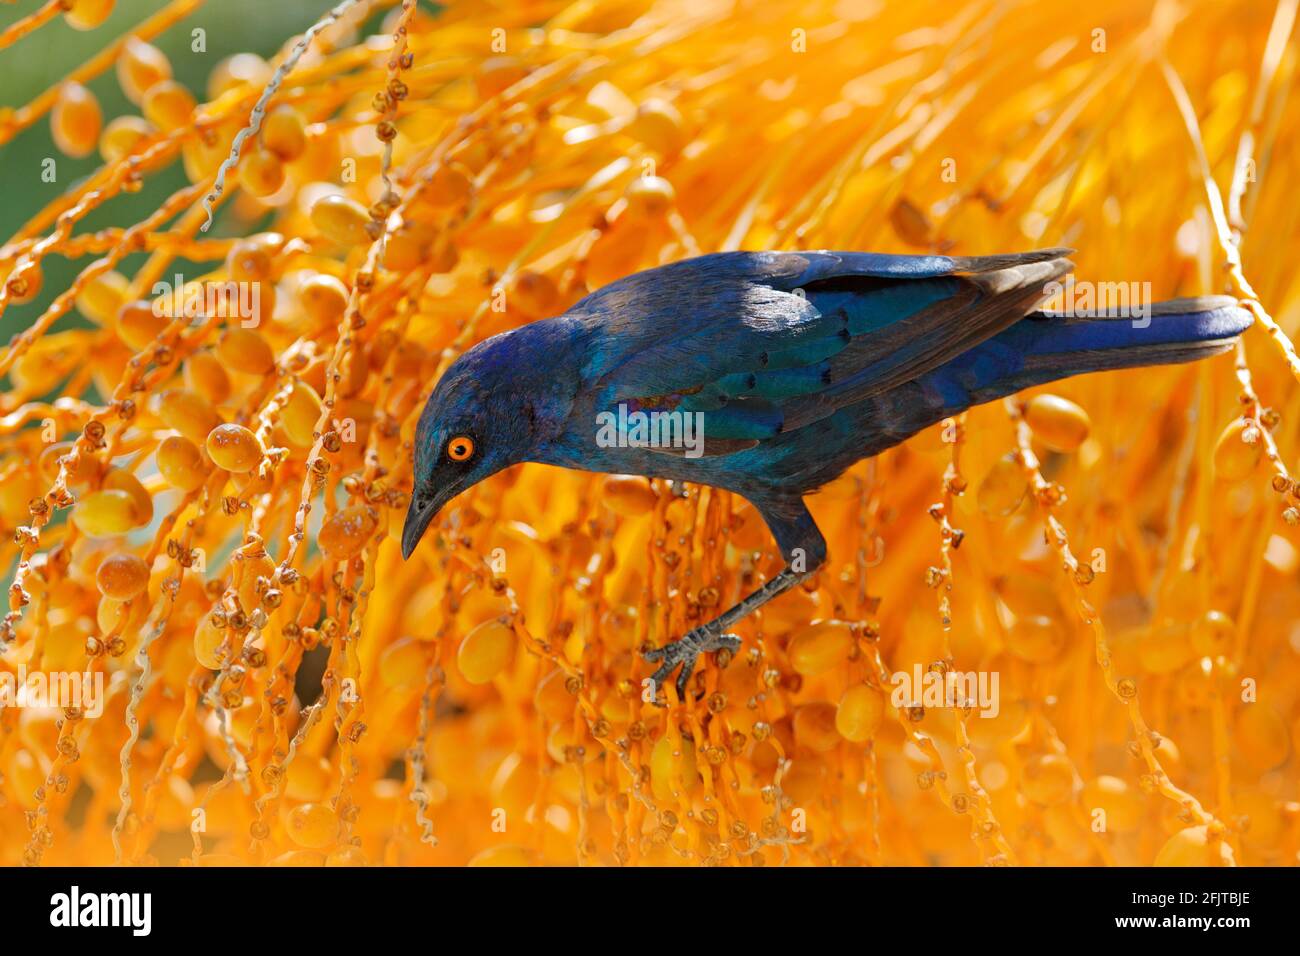 Cape Glossy Starling, Lamprotornis nitens, in nature habitat, orange plam tree with fruits. Detail close-up portrait with yellow eye. Beautiful shiny Stock Photo